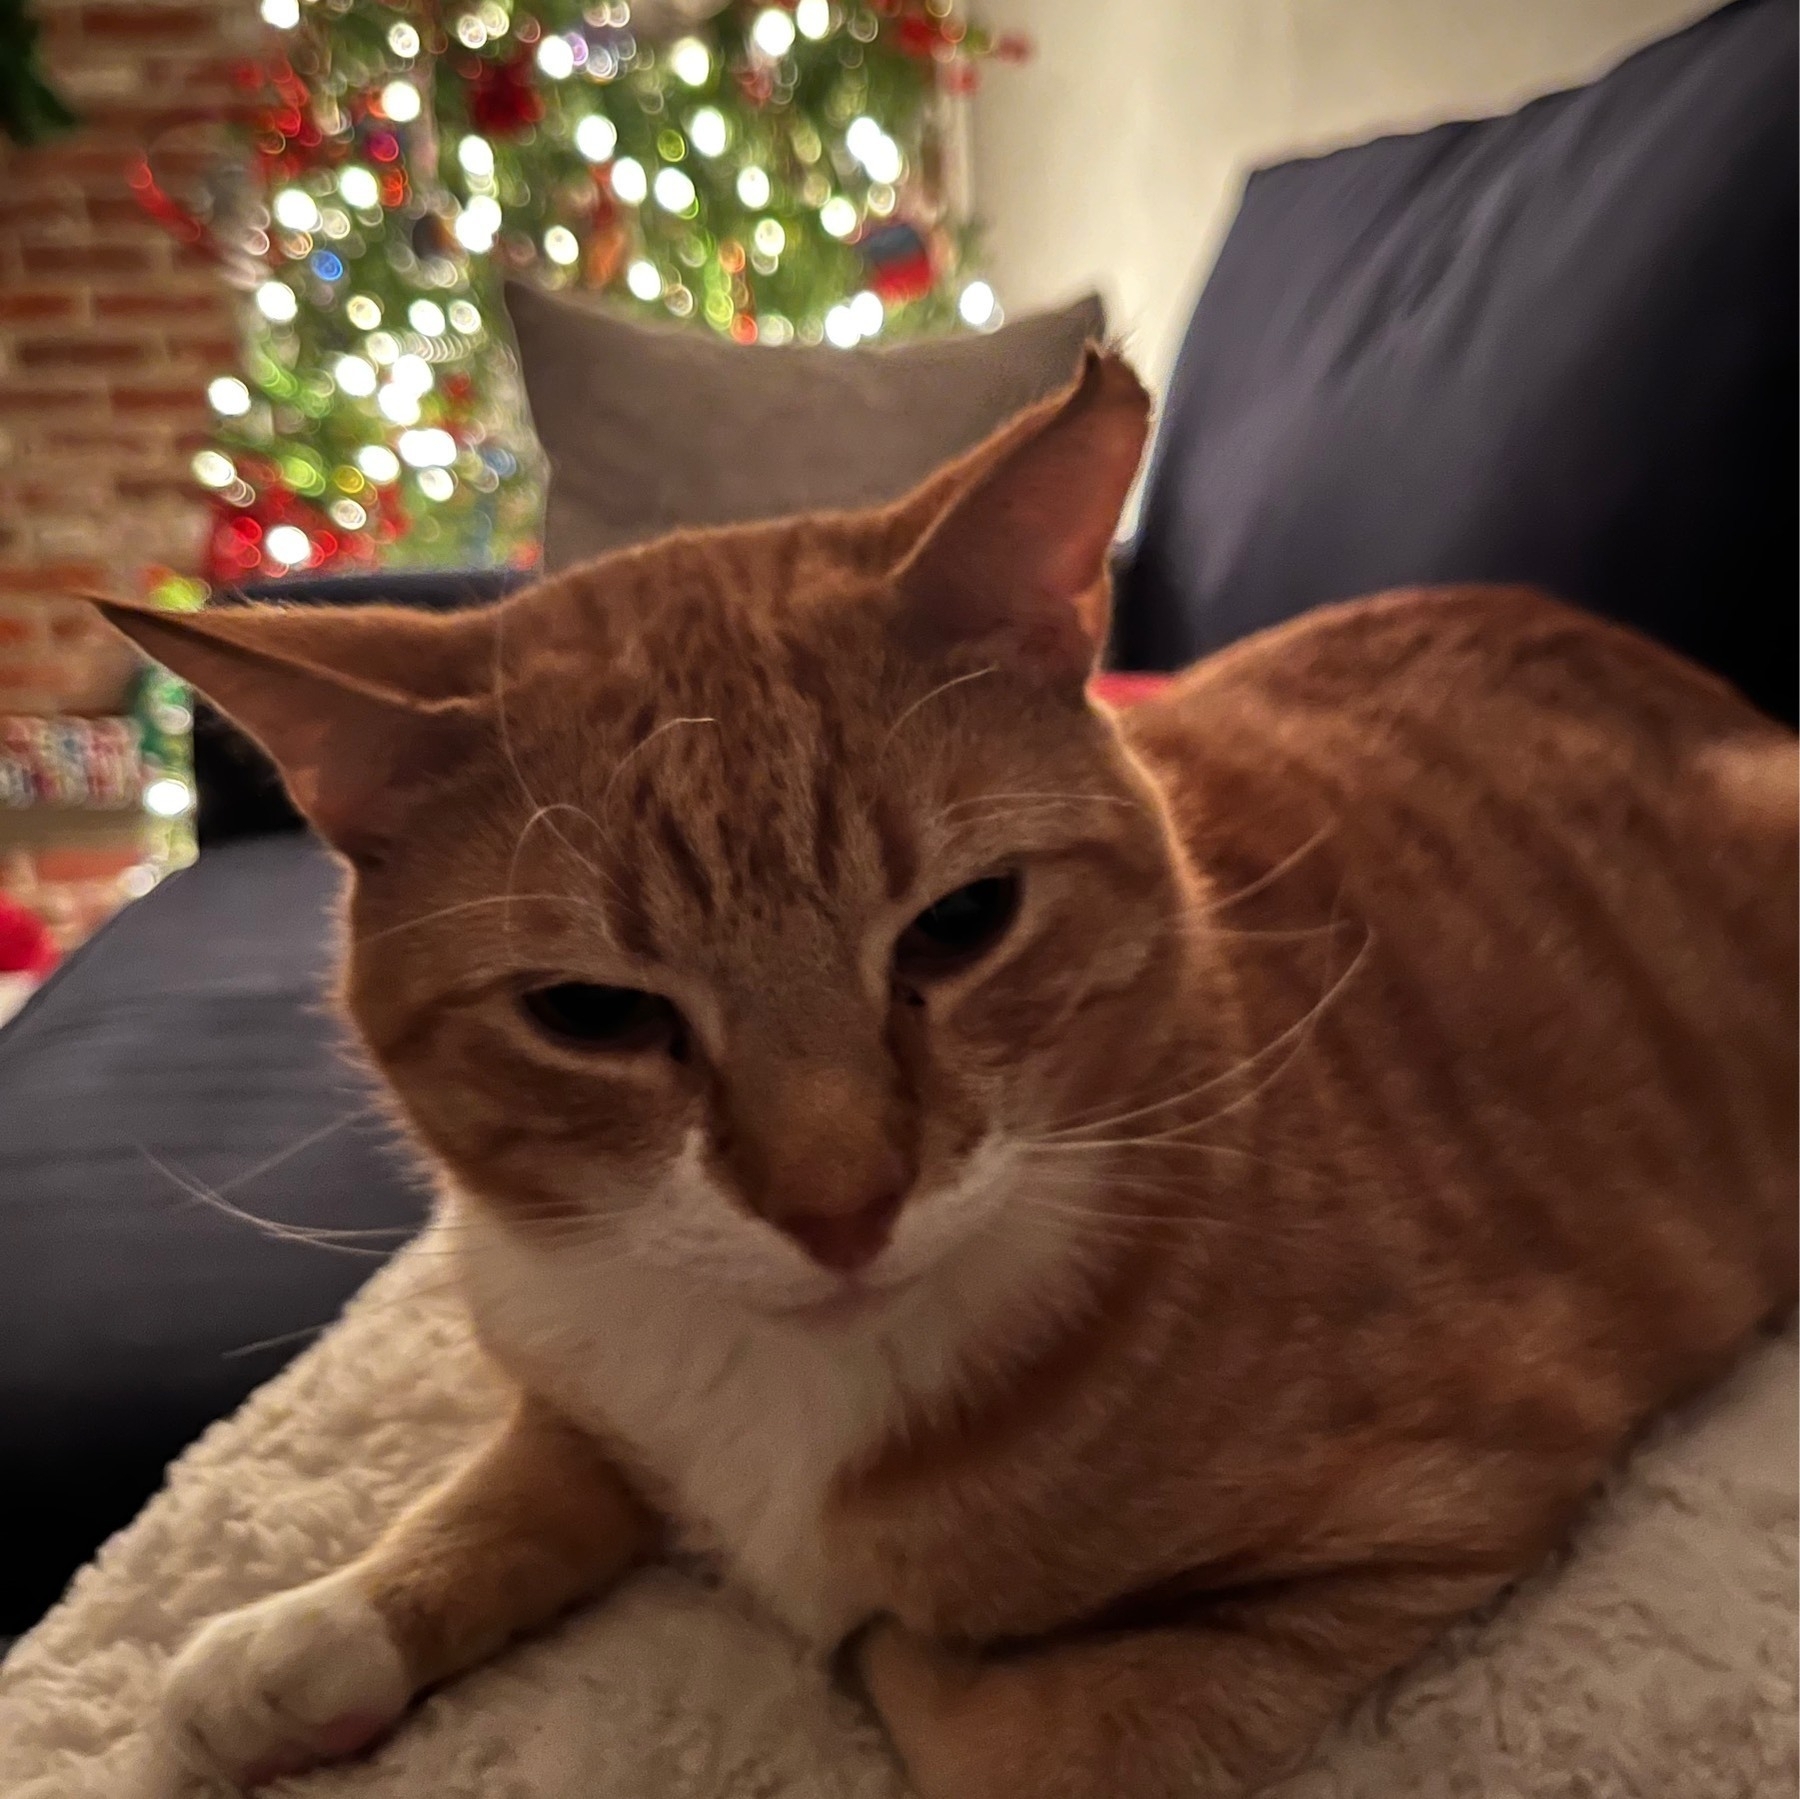 An orange tabby, seated on a pillow on a couch, with out-of-focus Christmas lights in the background.